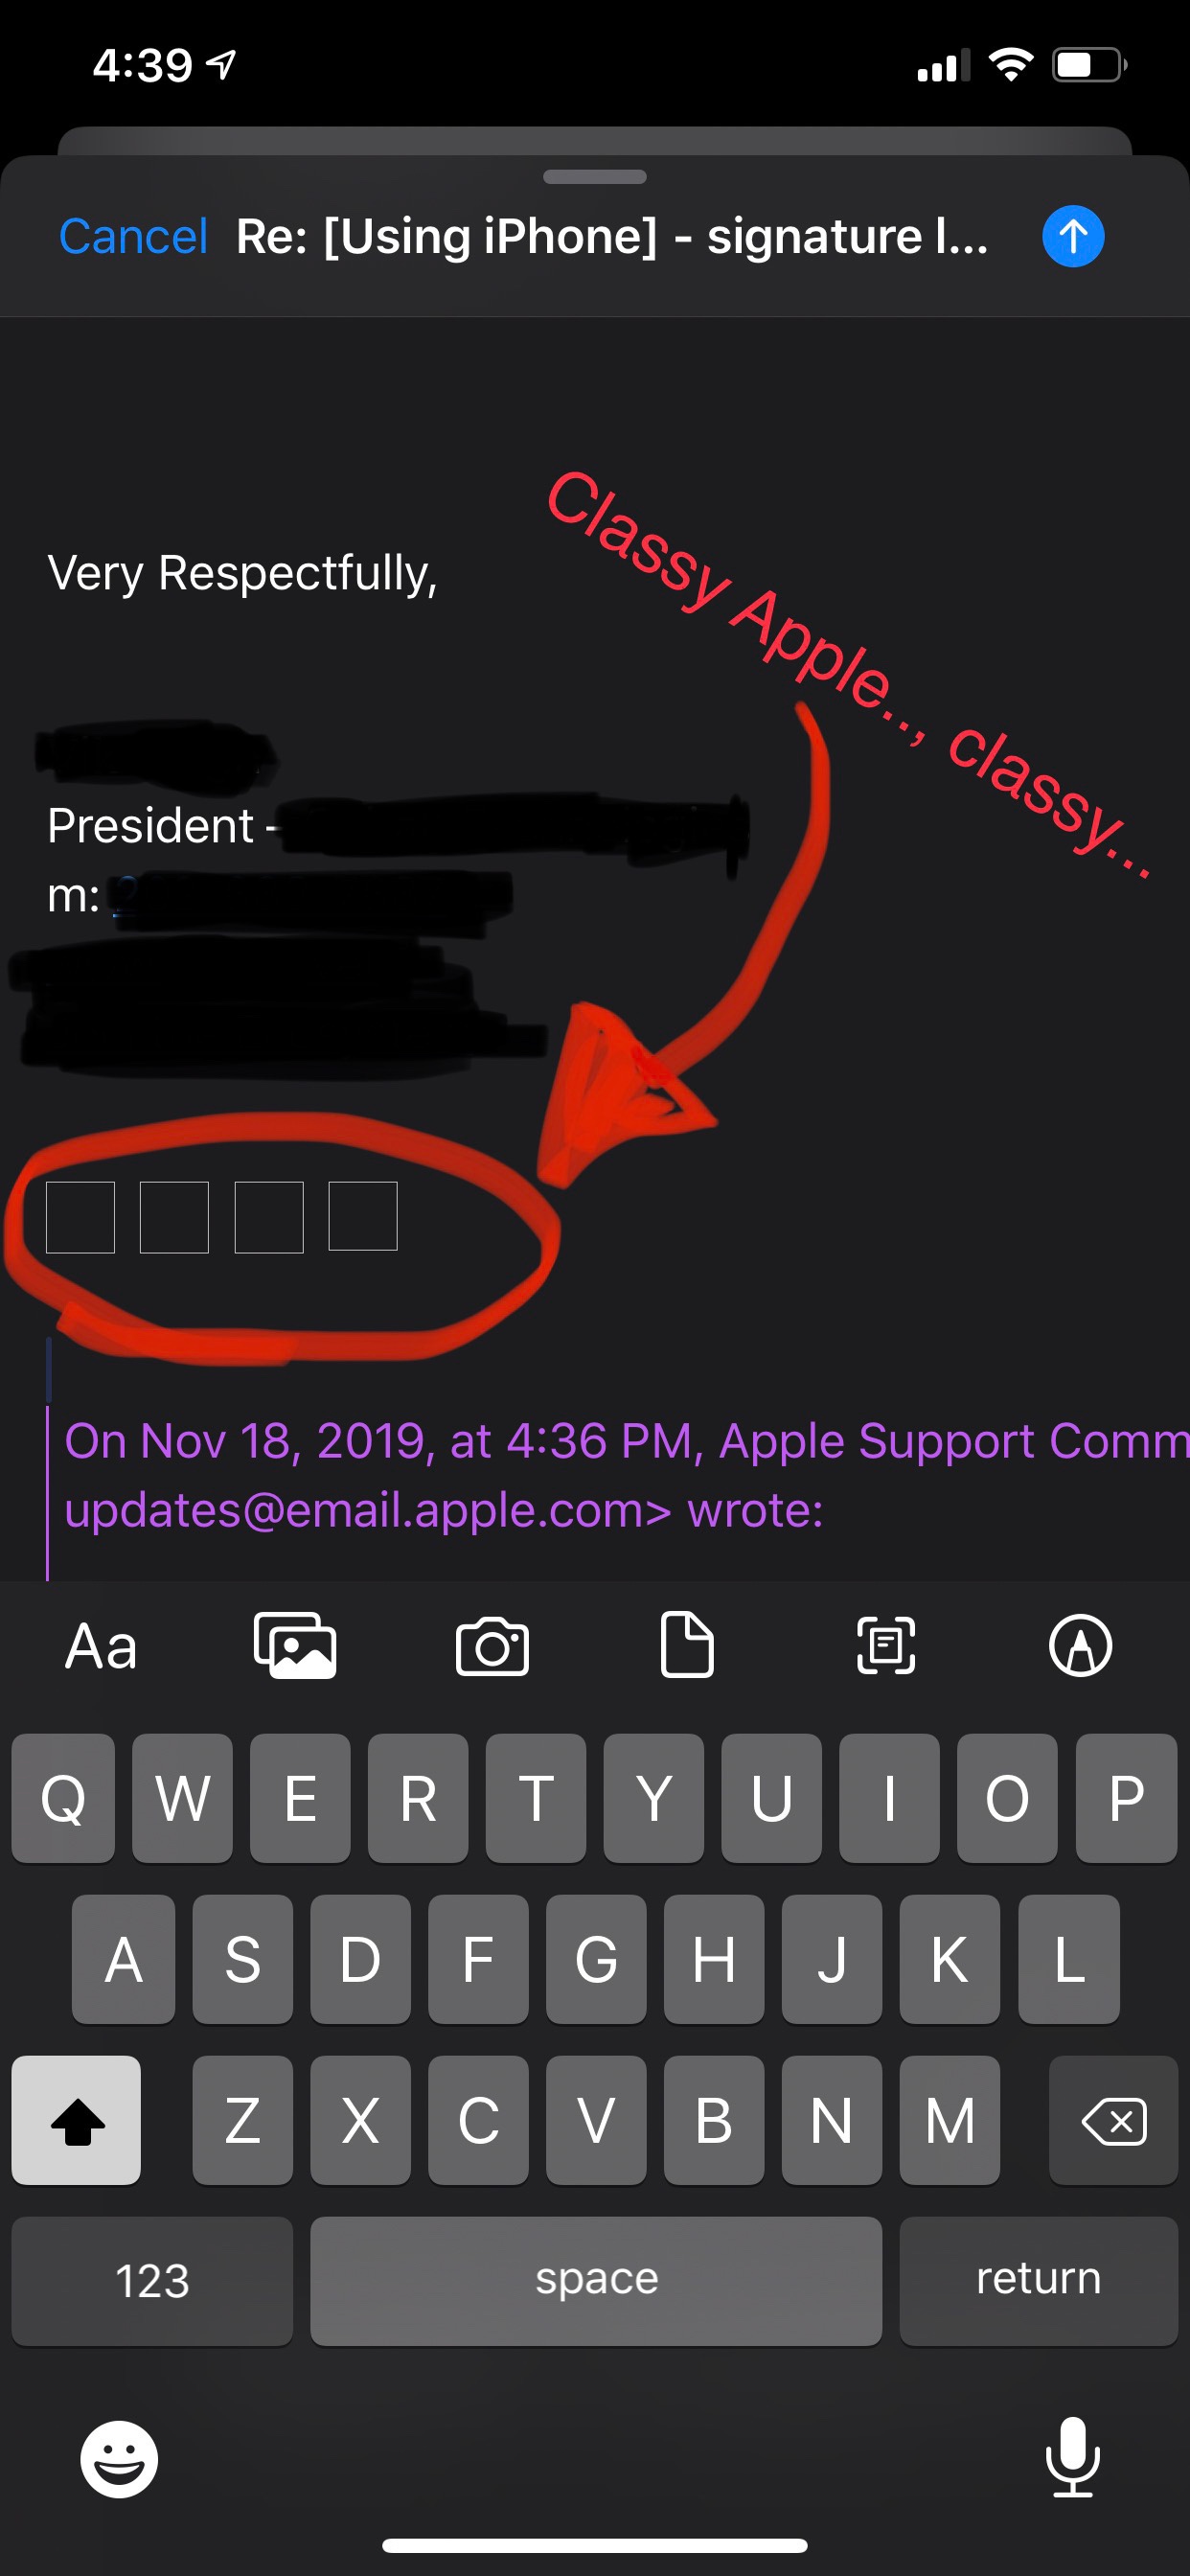 iPhone email signature image not showing - Apple Community